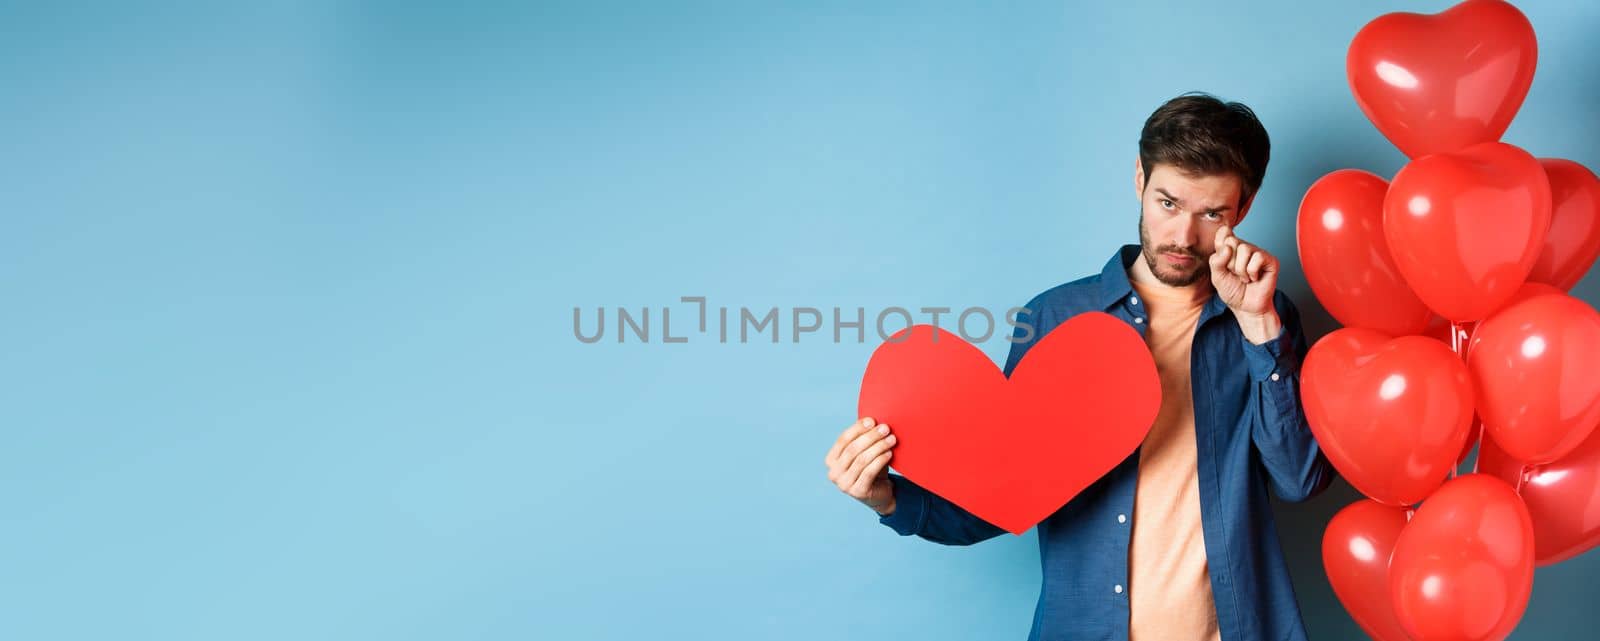 Sad and heartbroken man crying, wiping tears, standing with red heart and balloons, breakup on Valentines day, blue background by Benzoix